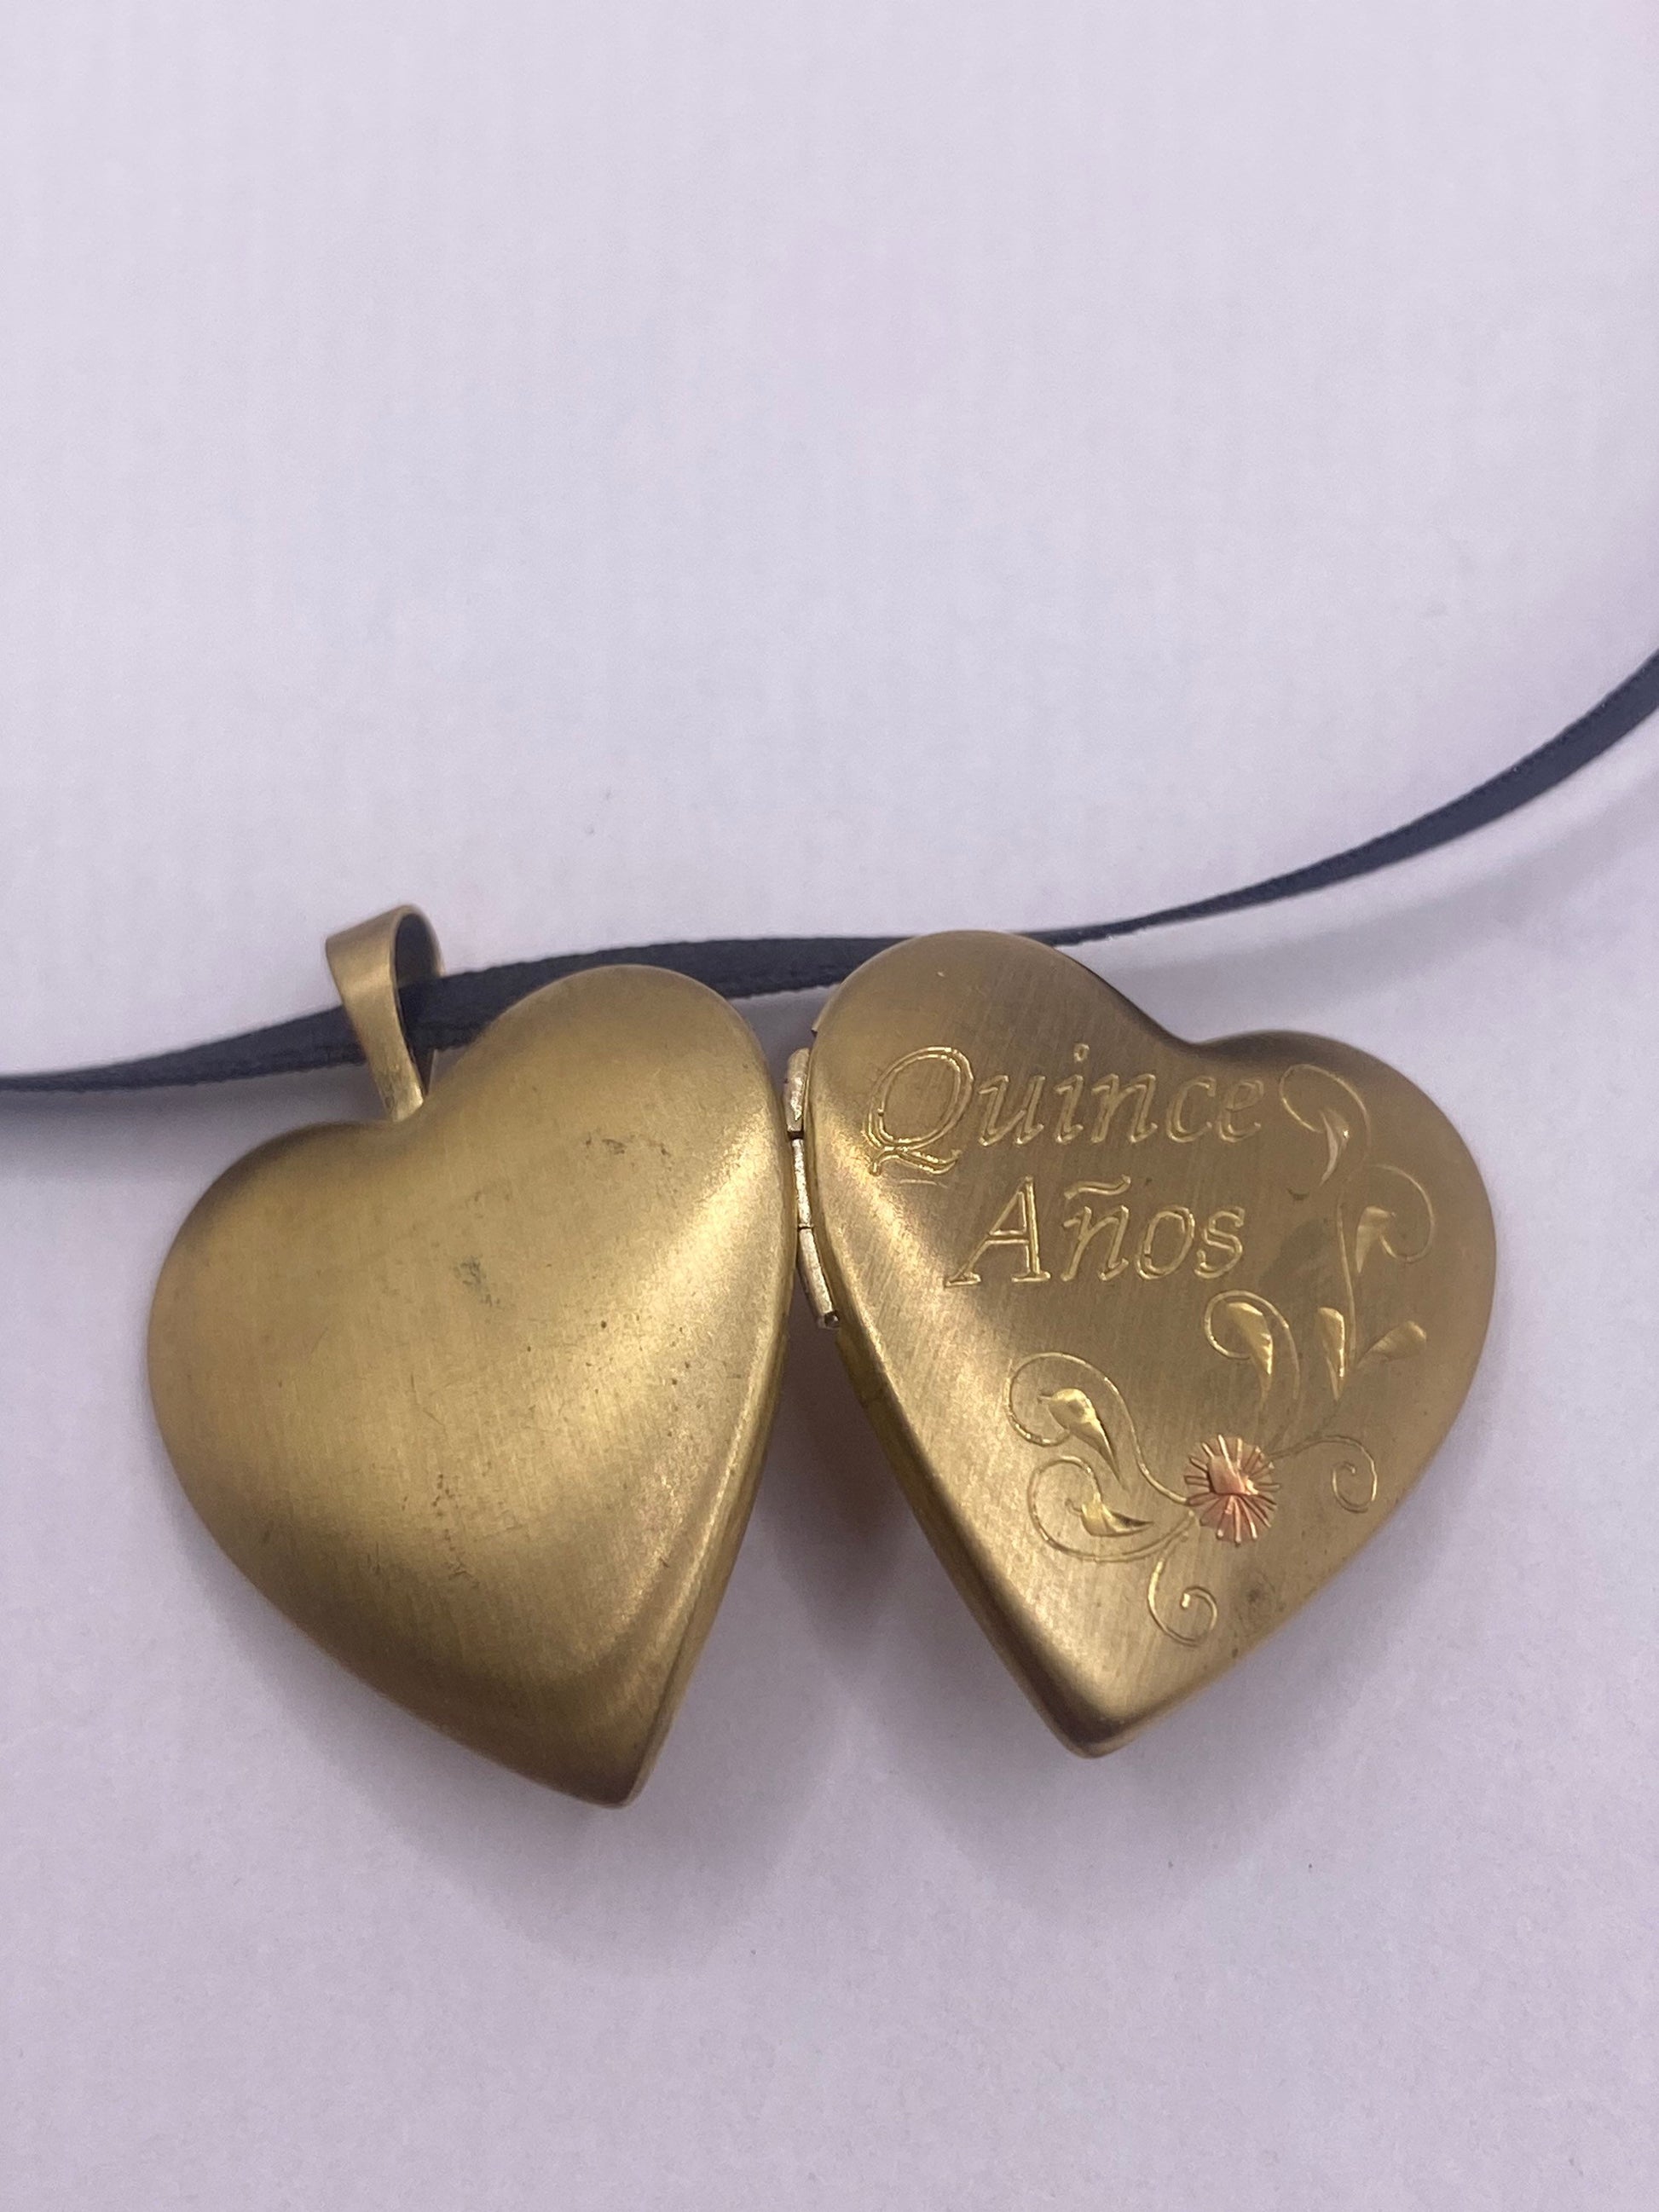 Vintage Gold Locket | Tiny Heart 9k Gold Filled Pendant Photo Memory Charm Engraved "Quince Anos" Quinceañera Birthday | Choker Necklace